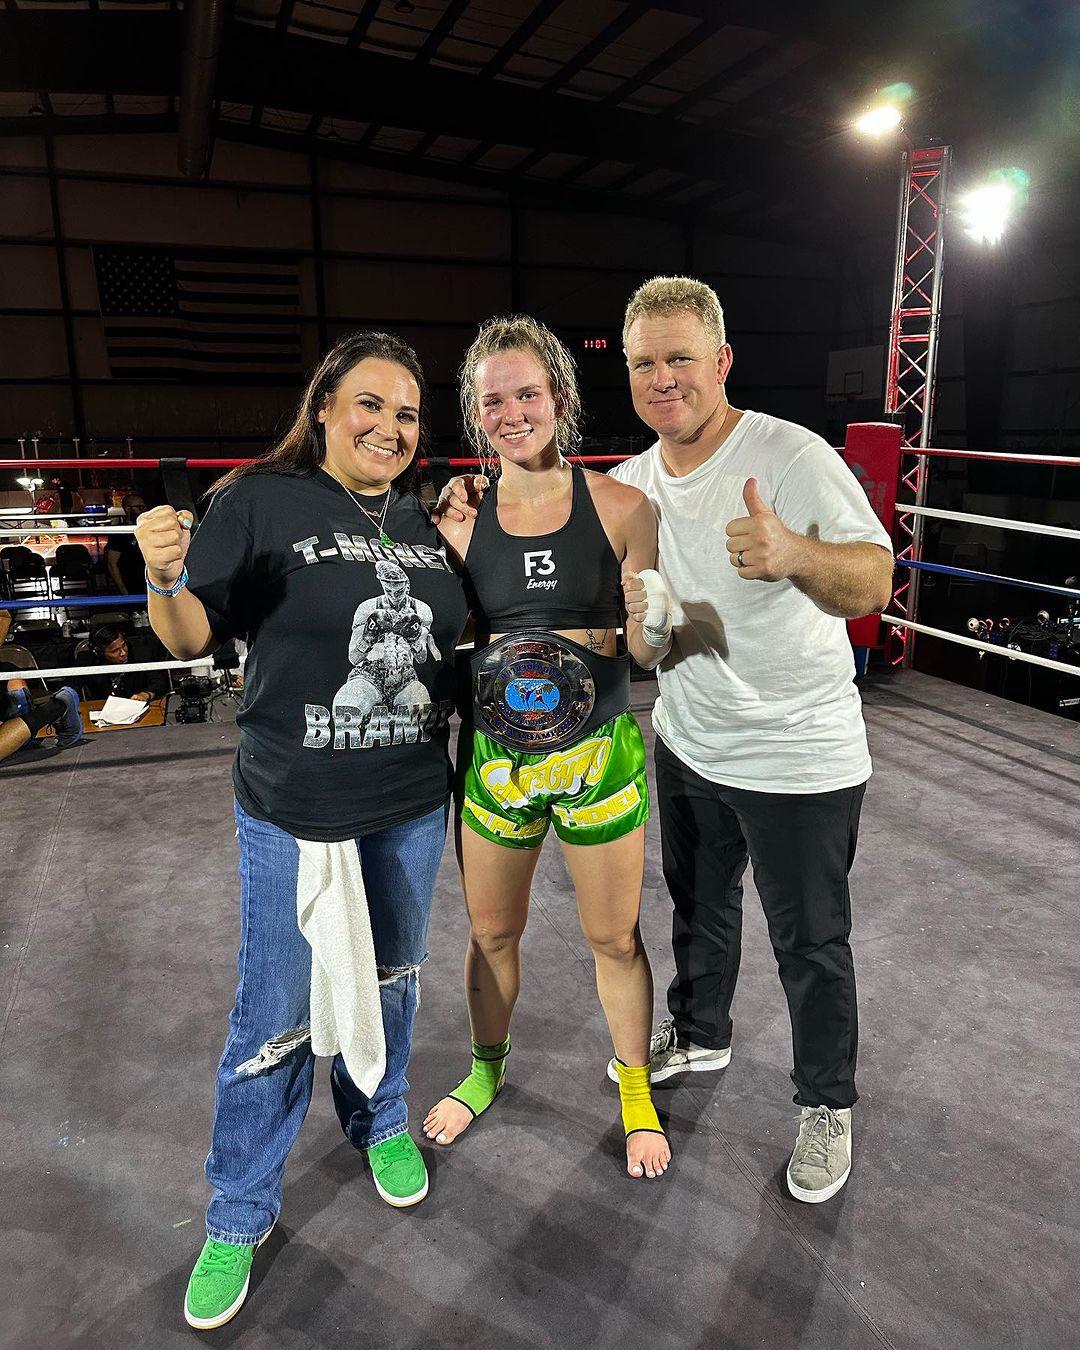 Tierra Brandt books her place at the 2023 World Combat Games